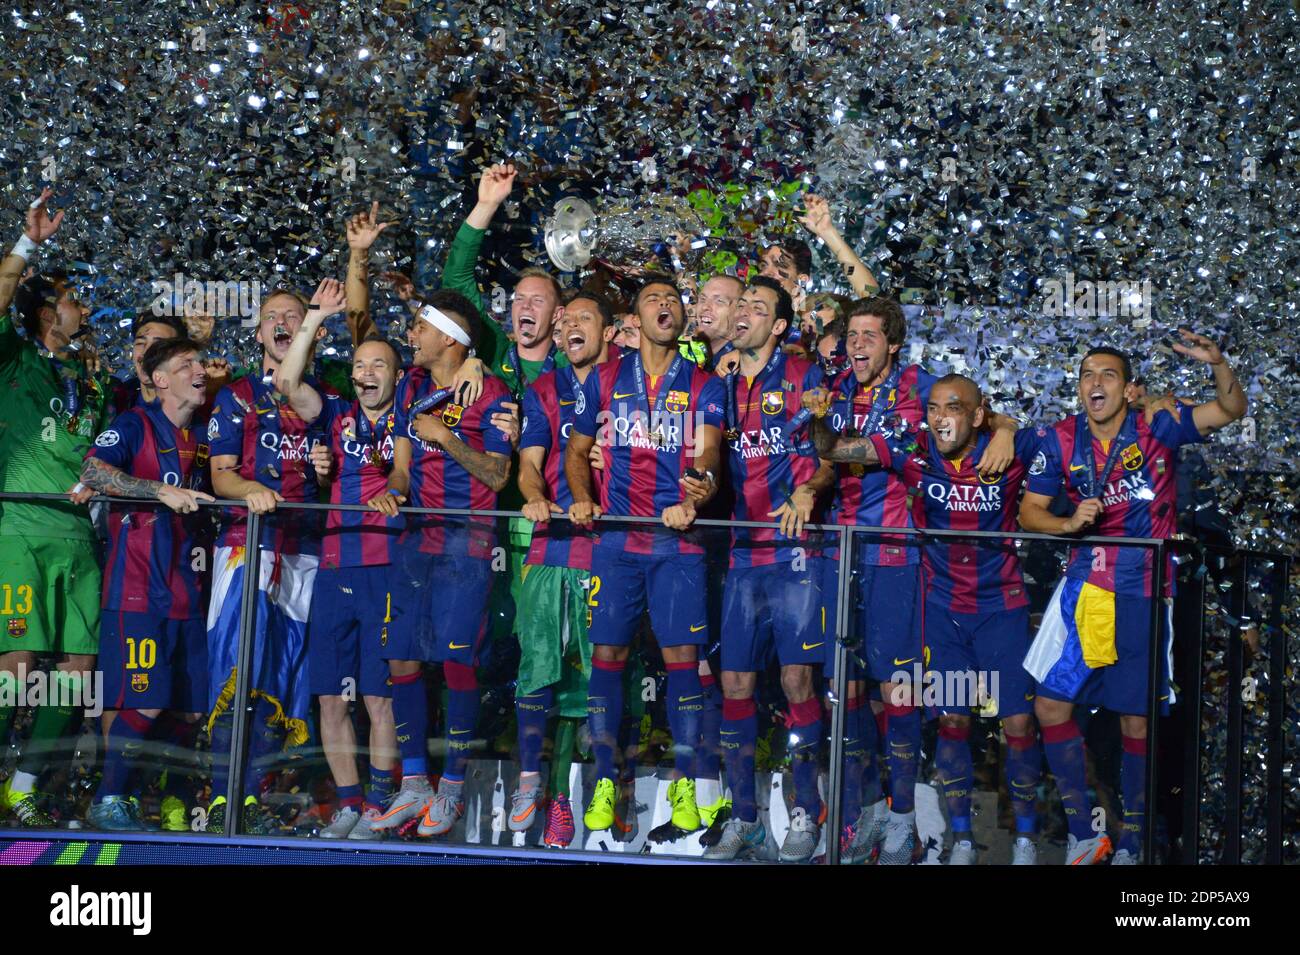 Personlig Hvor fint konkurs Barcelona players lift the UEFA Champions League Trophy on the Balcony  after winning the Champion's League Final soccer match, Barcelona vs  Juventus in Berlin, Germany, on June 6th, 2015. Barcelona won 3-1.